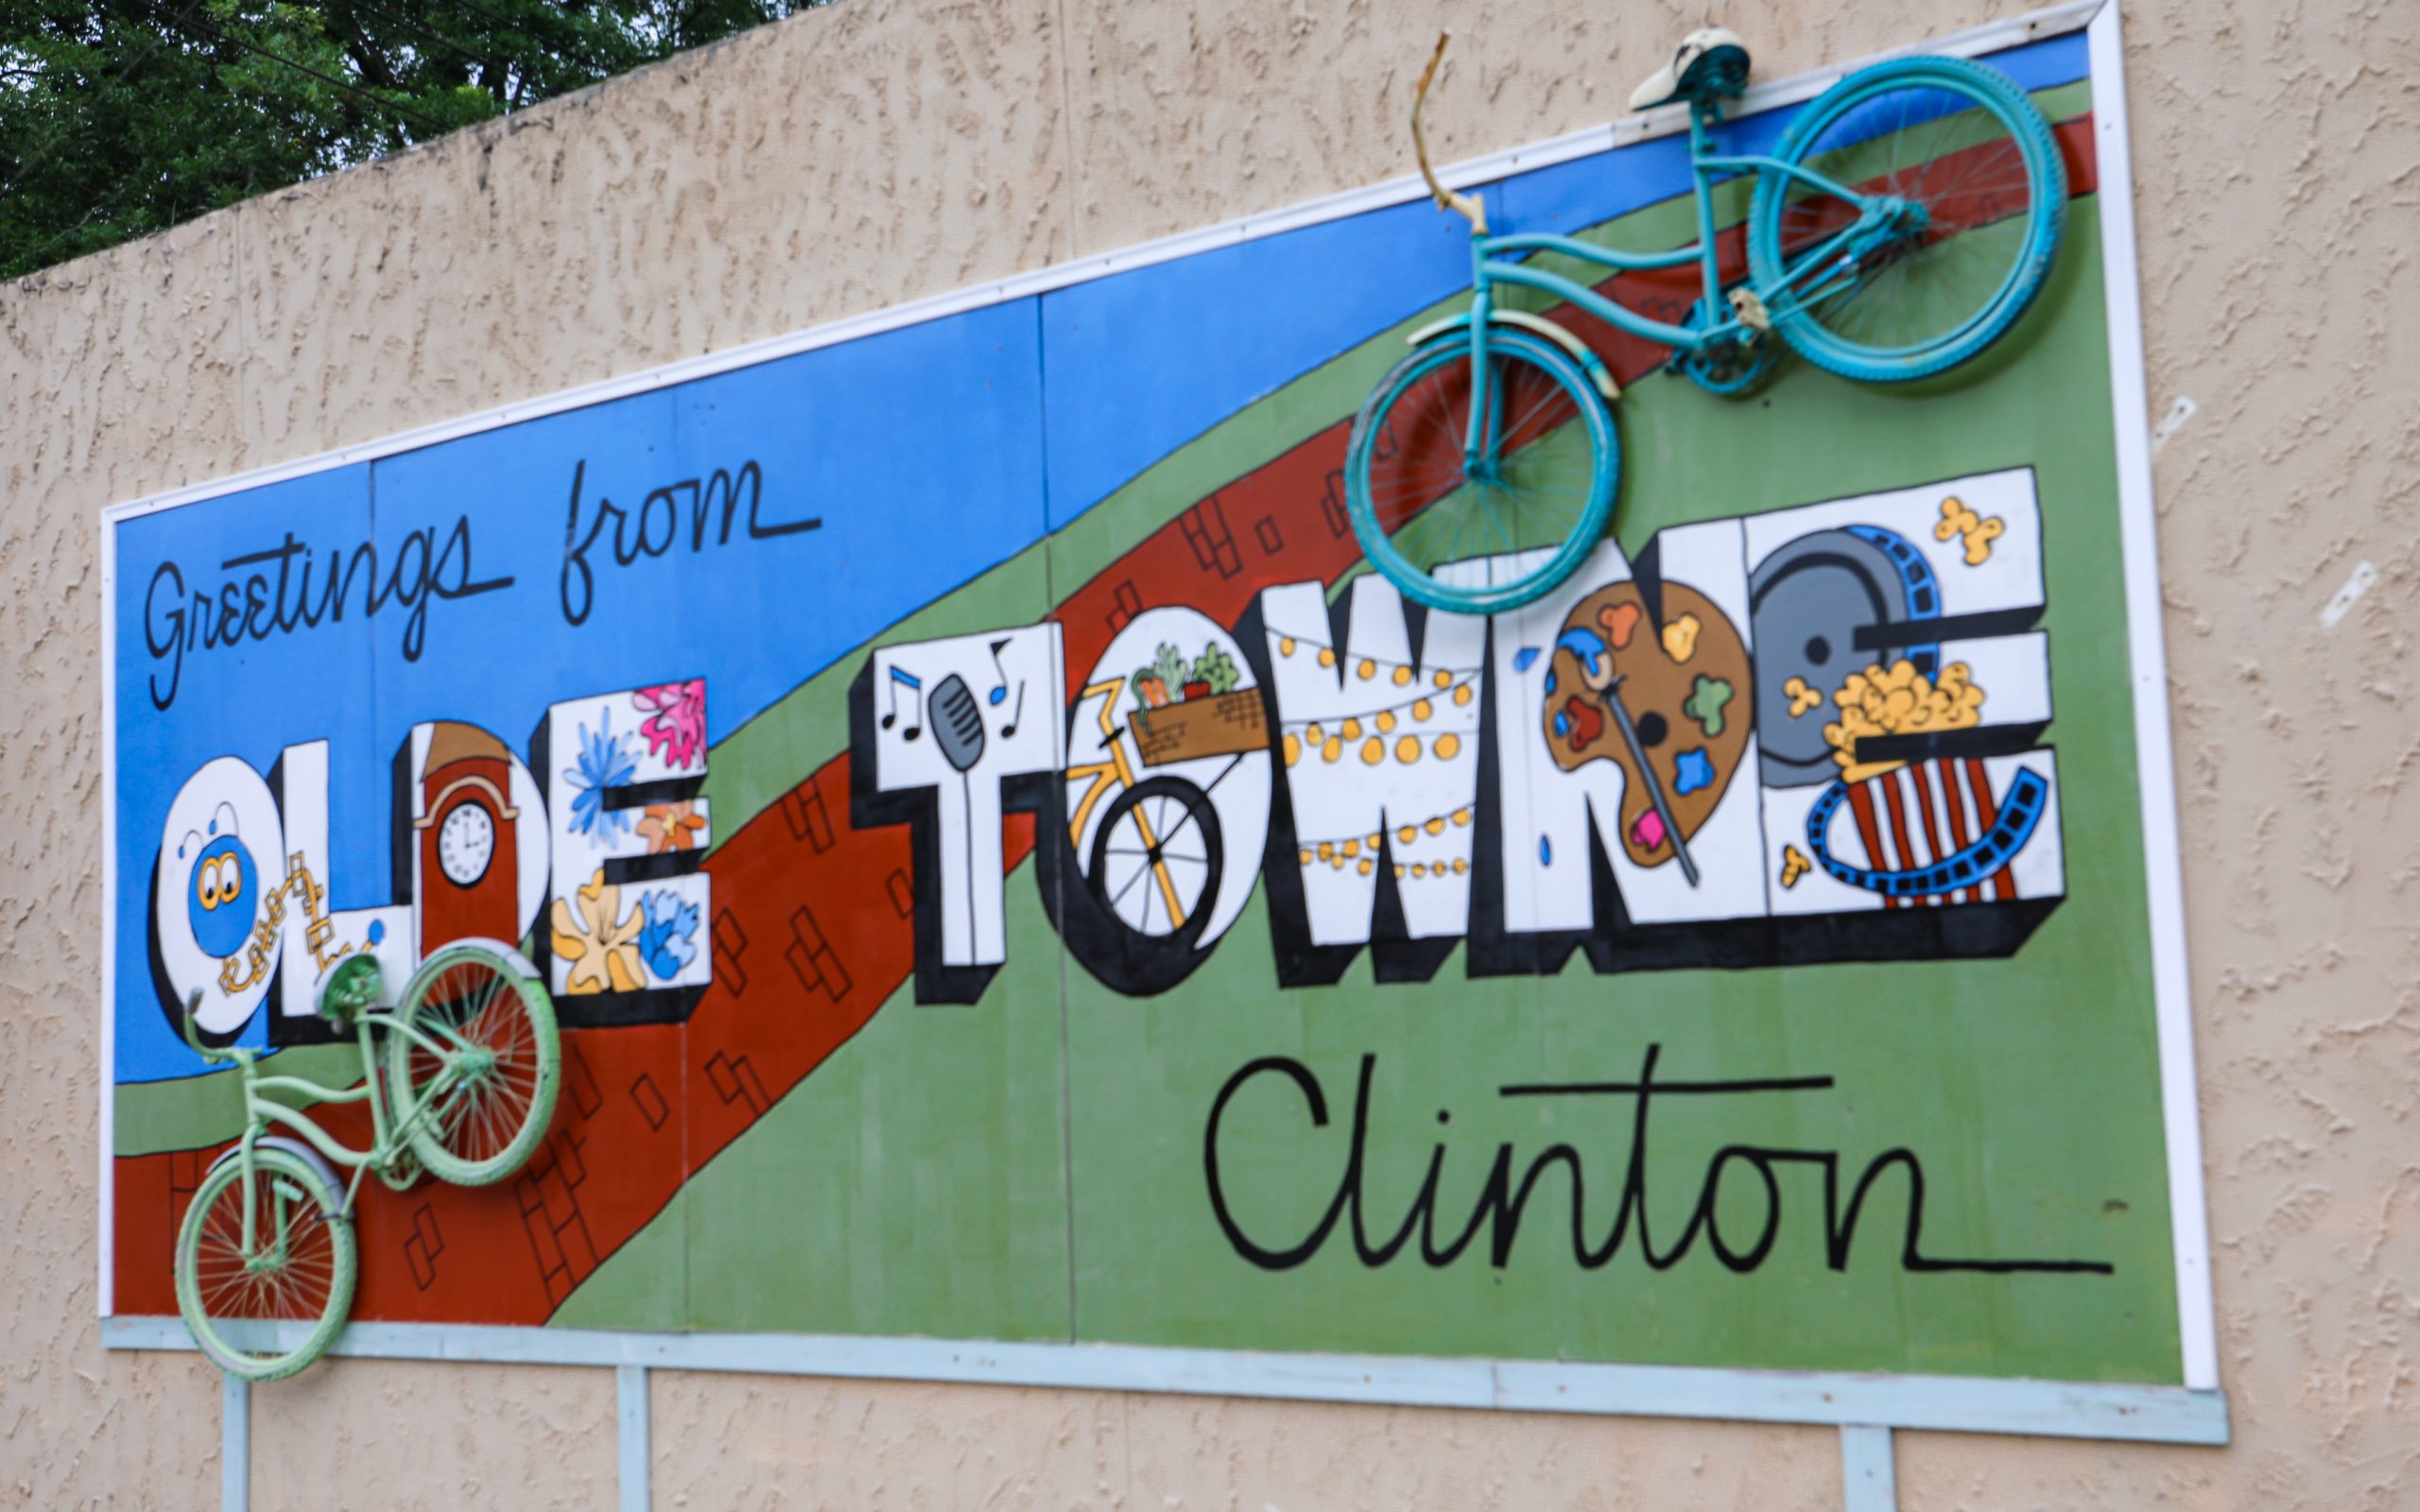 Olde Towne Clinton graphic sign